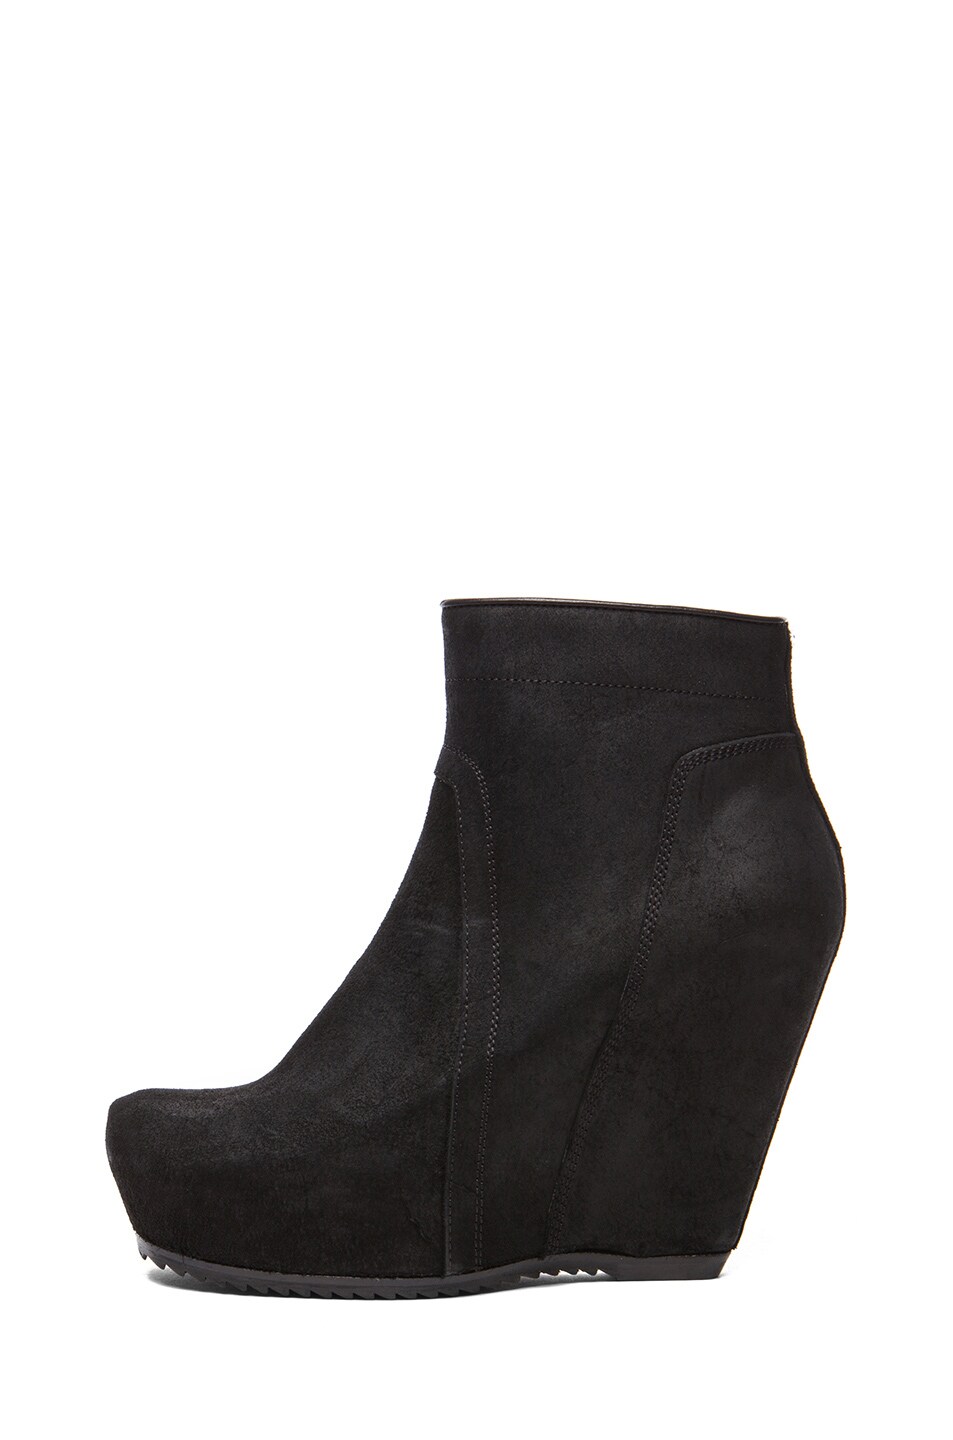 Image 1 of Rick Owens Distressed Leather Basic Wedge Bootie in Black